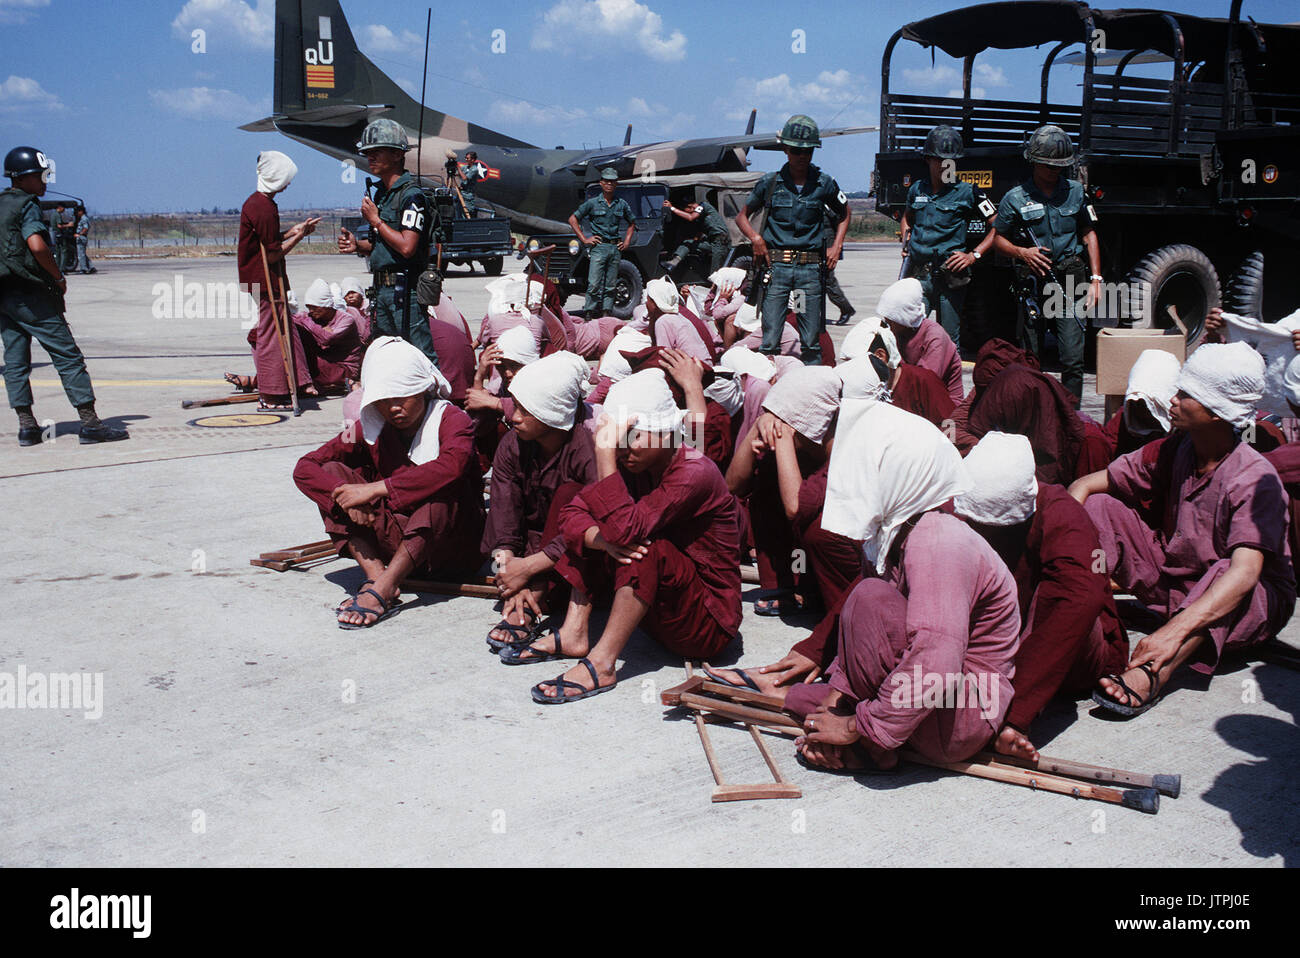 Viet Cong POWs sit on the ramp at Tan Son Nhut Air Base under the watchful eyes of South Vietnamese military police.  The POWs were brought to the airbase in the 6X6 trucks in the background and will be airlifted to Loc Ninh, South Vietnam on the C-123 transport aircraft for the prisoner exchange between the United States/South Vietnam and North Vietnam/Viet Cong militaries. Stock Photo